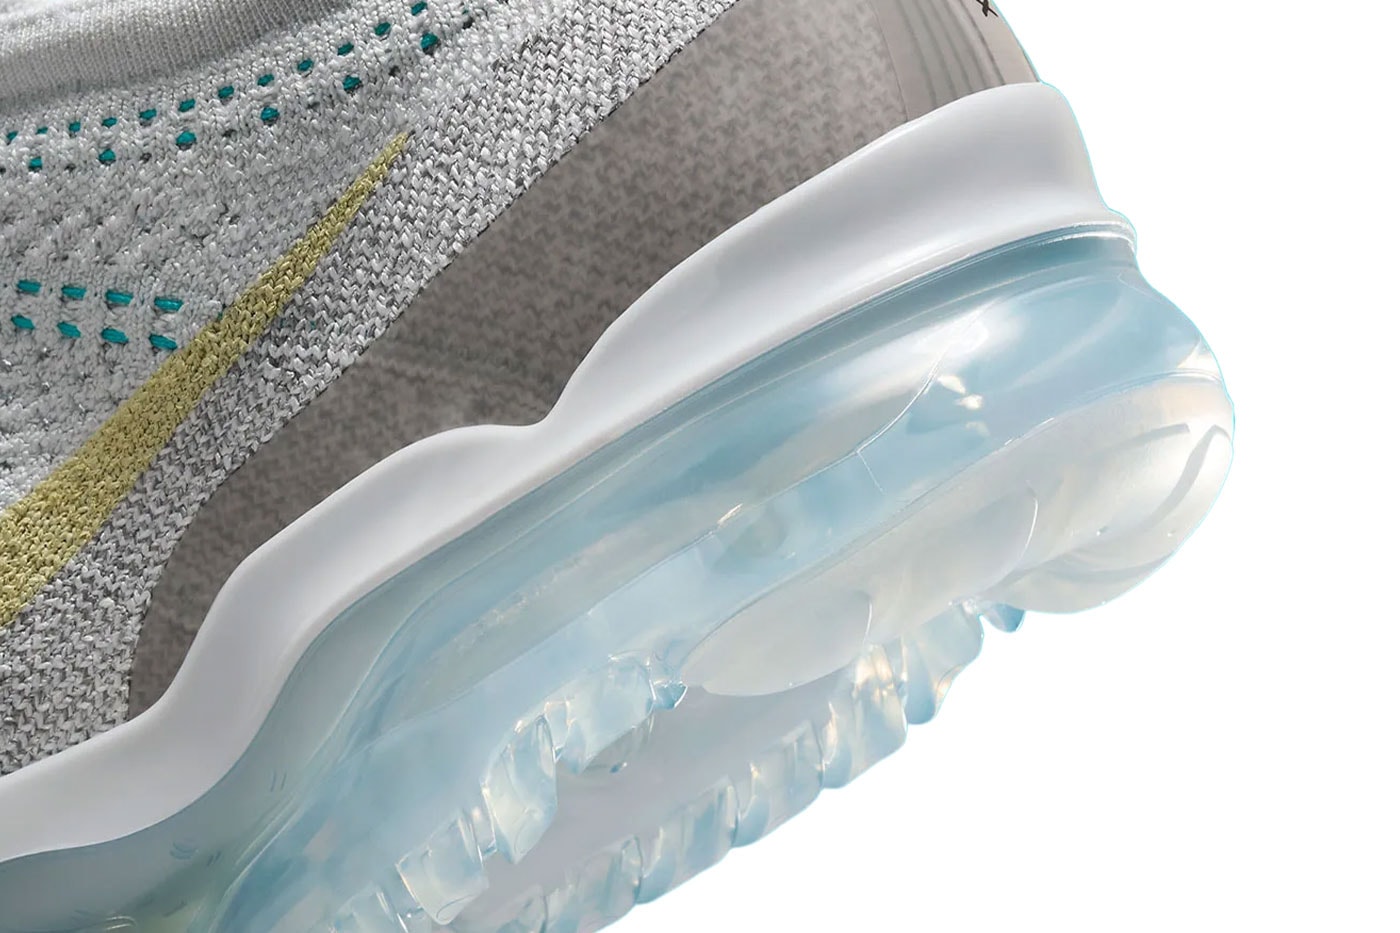 Nike Vapormax Flyknit 2023 Dusty Cactus Light Grey Release Info DV1678-011 sneaker running shoes swoosh semi translucent outsole air 